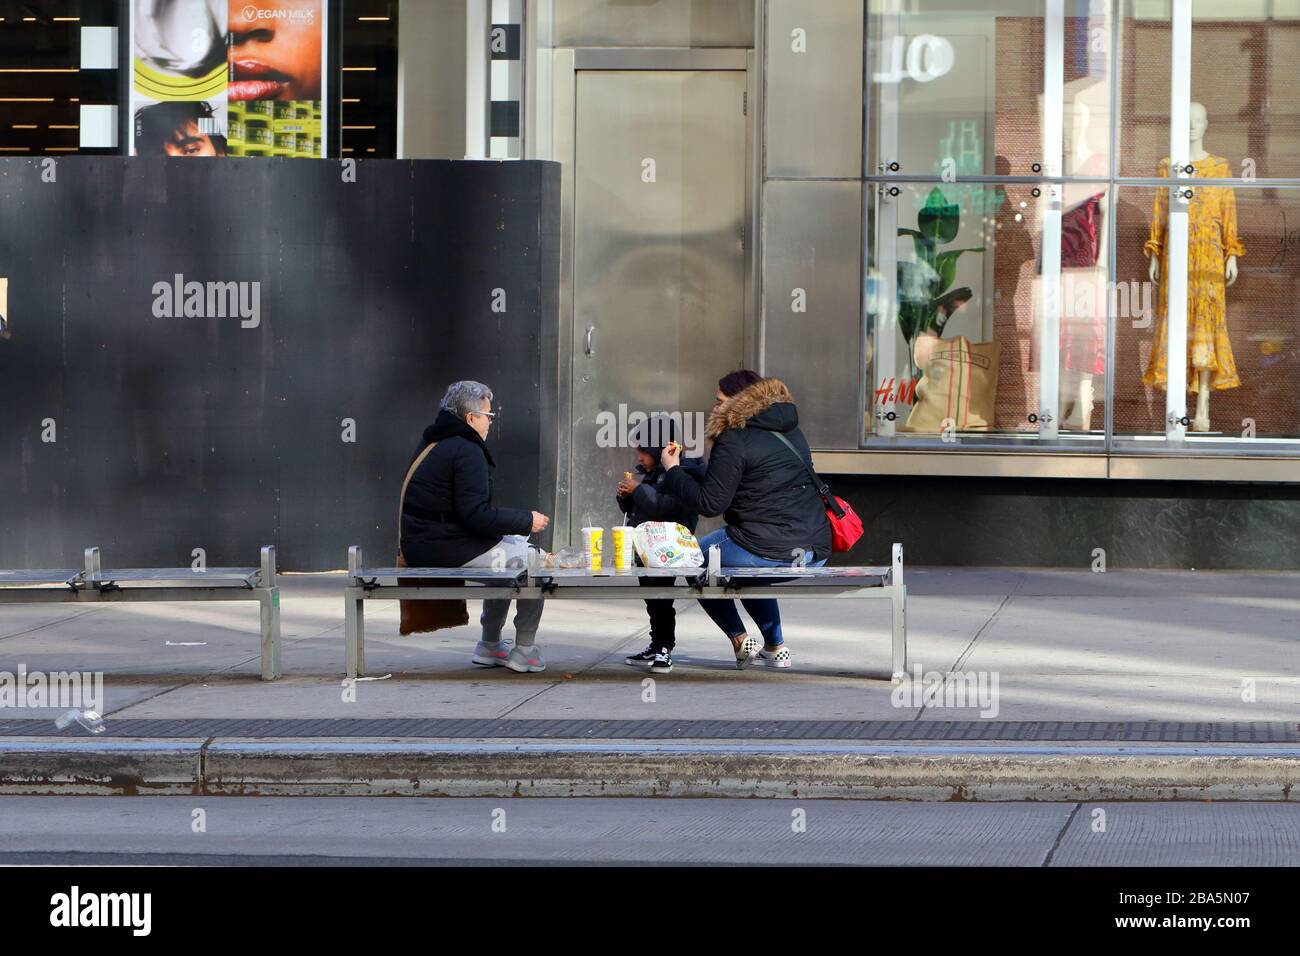 New York, NY. 24th March 2020. A family dines outside on a bench in Manhattan's Upper East Side during the coronavirus COVID-19 pandemic.  An executive order issued by the Governor of New York State has prohibited restaurants and bars from serving customers except for take-out and delivery orders only. Credit: Robert K. Chin. Stock Photo